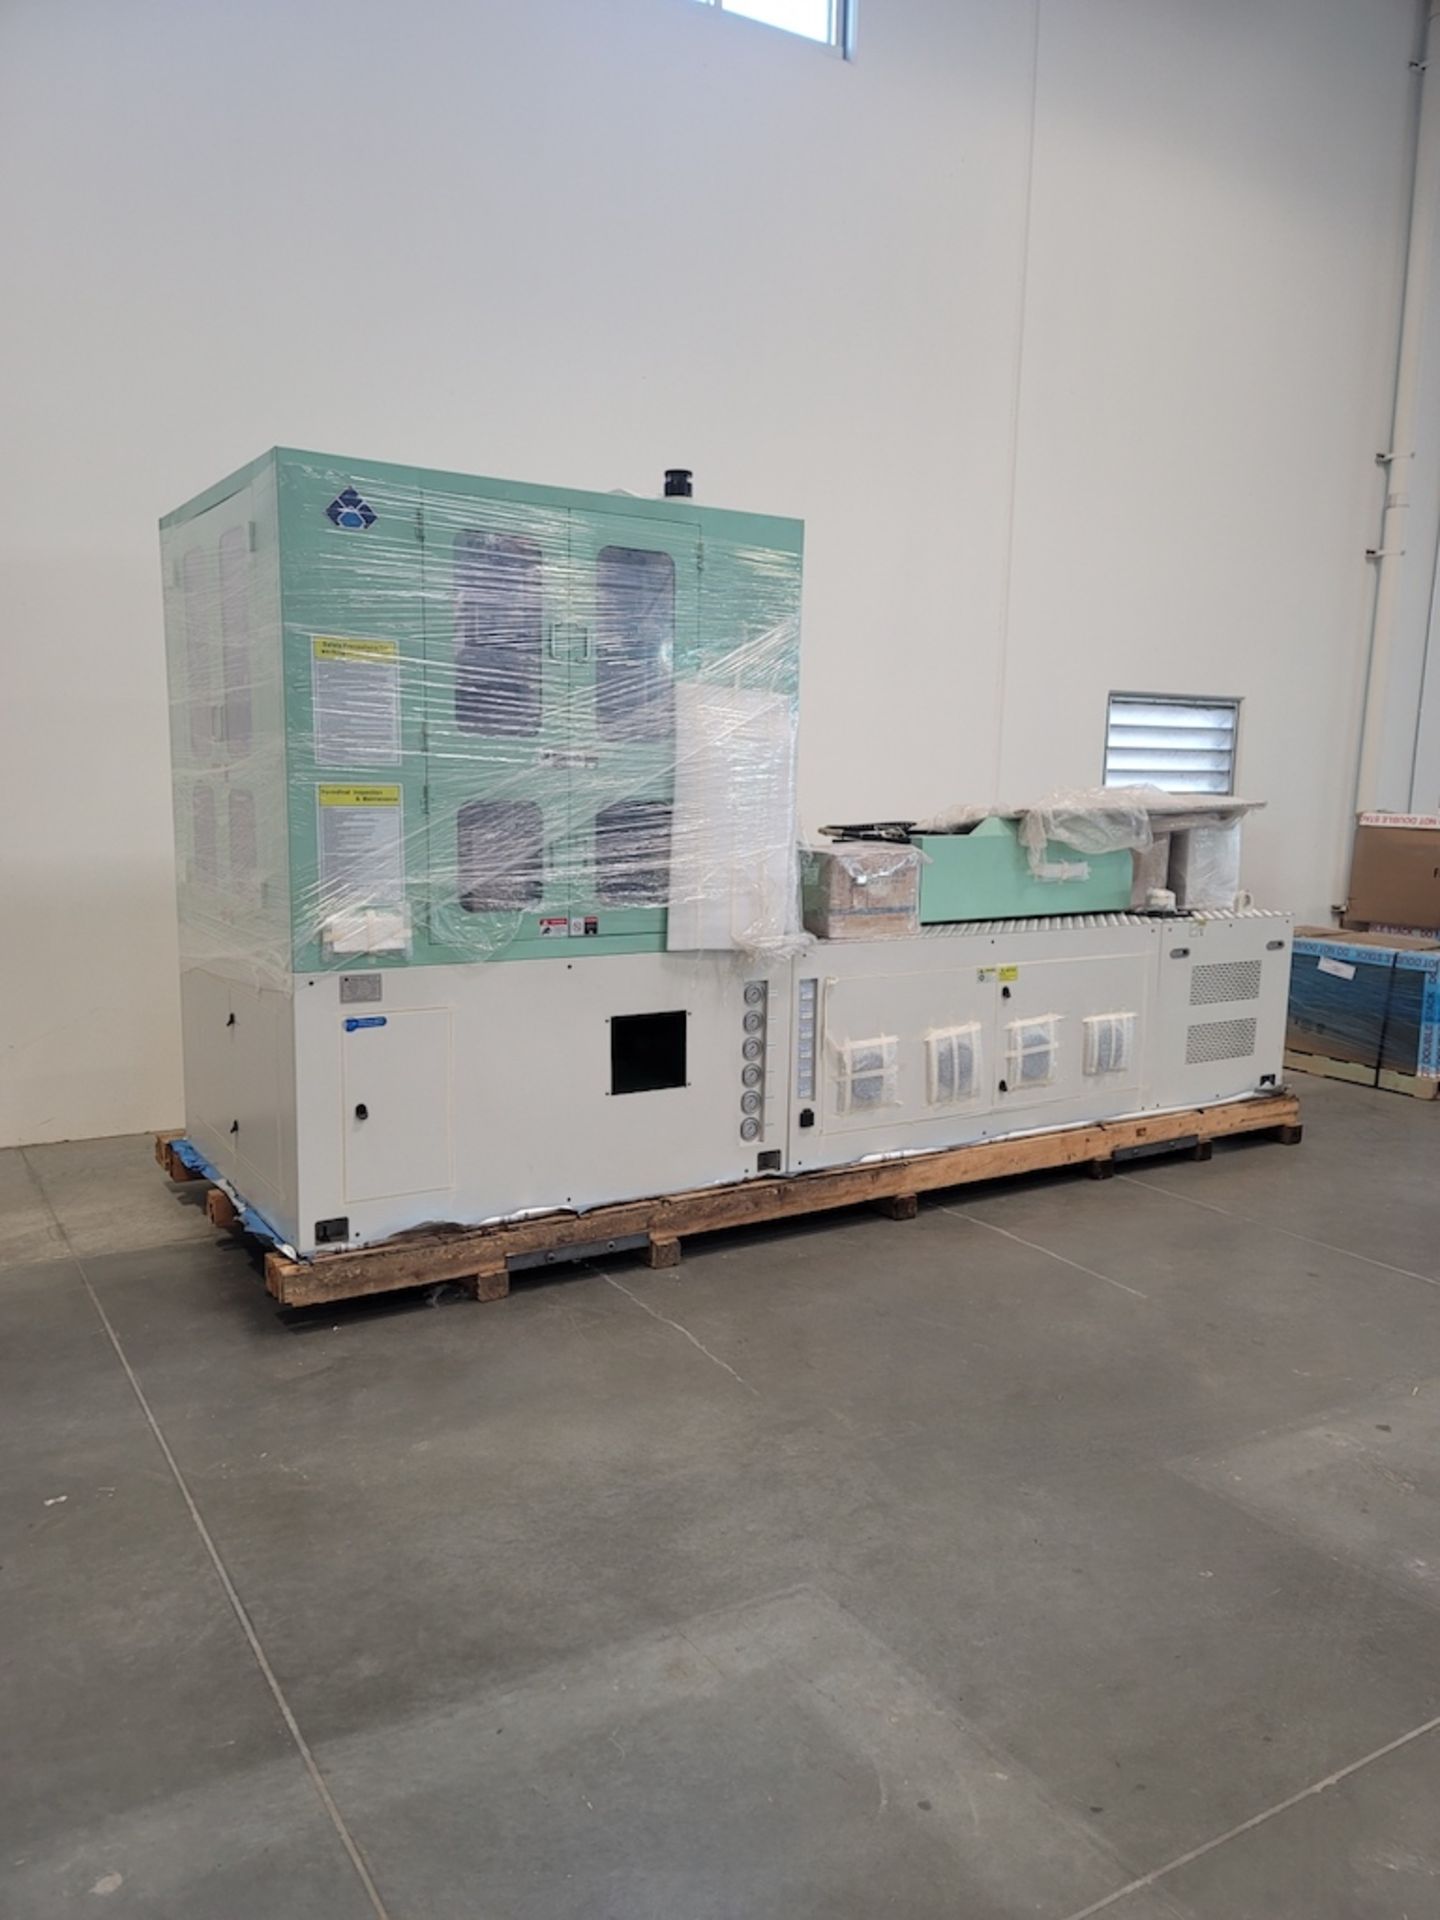 Midas Altatech MA-100-FSIII Injection Stretch Blow Molder, New in 2020 (NEVER IN SERVICE)